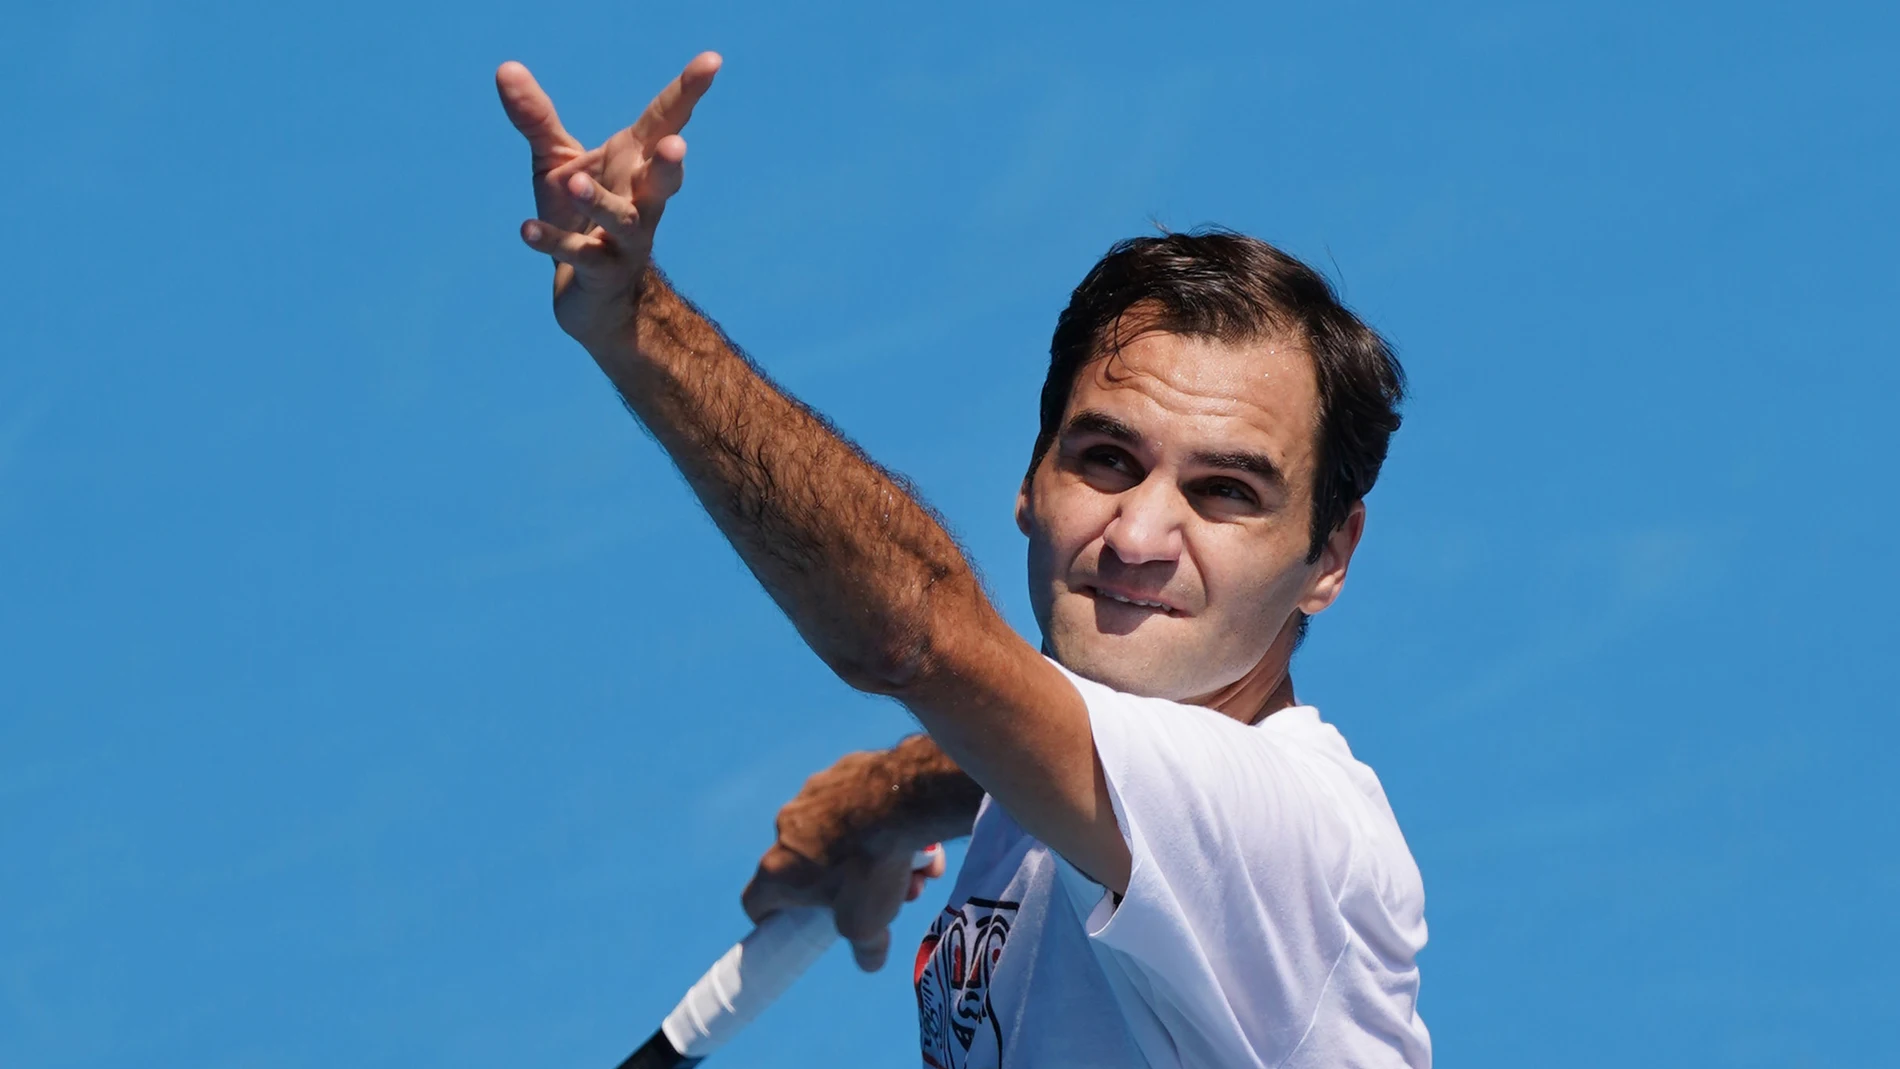 Roger Federer of Switzerland serves during an Australian Open practise session at Melbourne Park in Melbourne, Saturday, January 18, 2020. (AAP Image/Michael Dodge) NO ARCHIVING, EDITORIAL USE ONLY